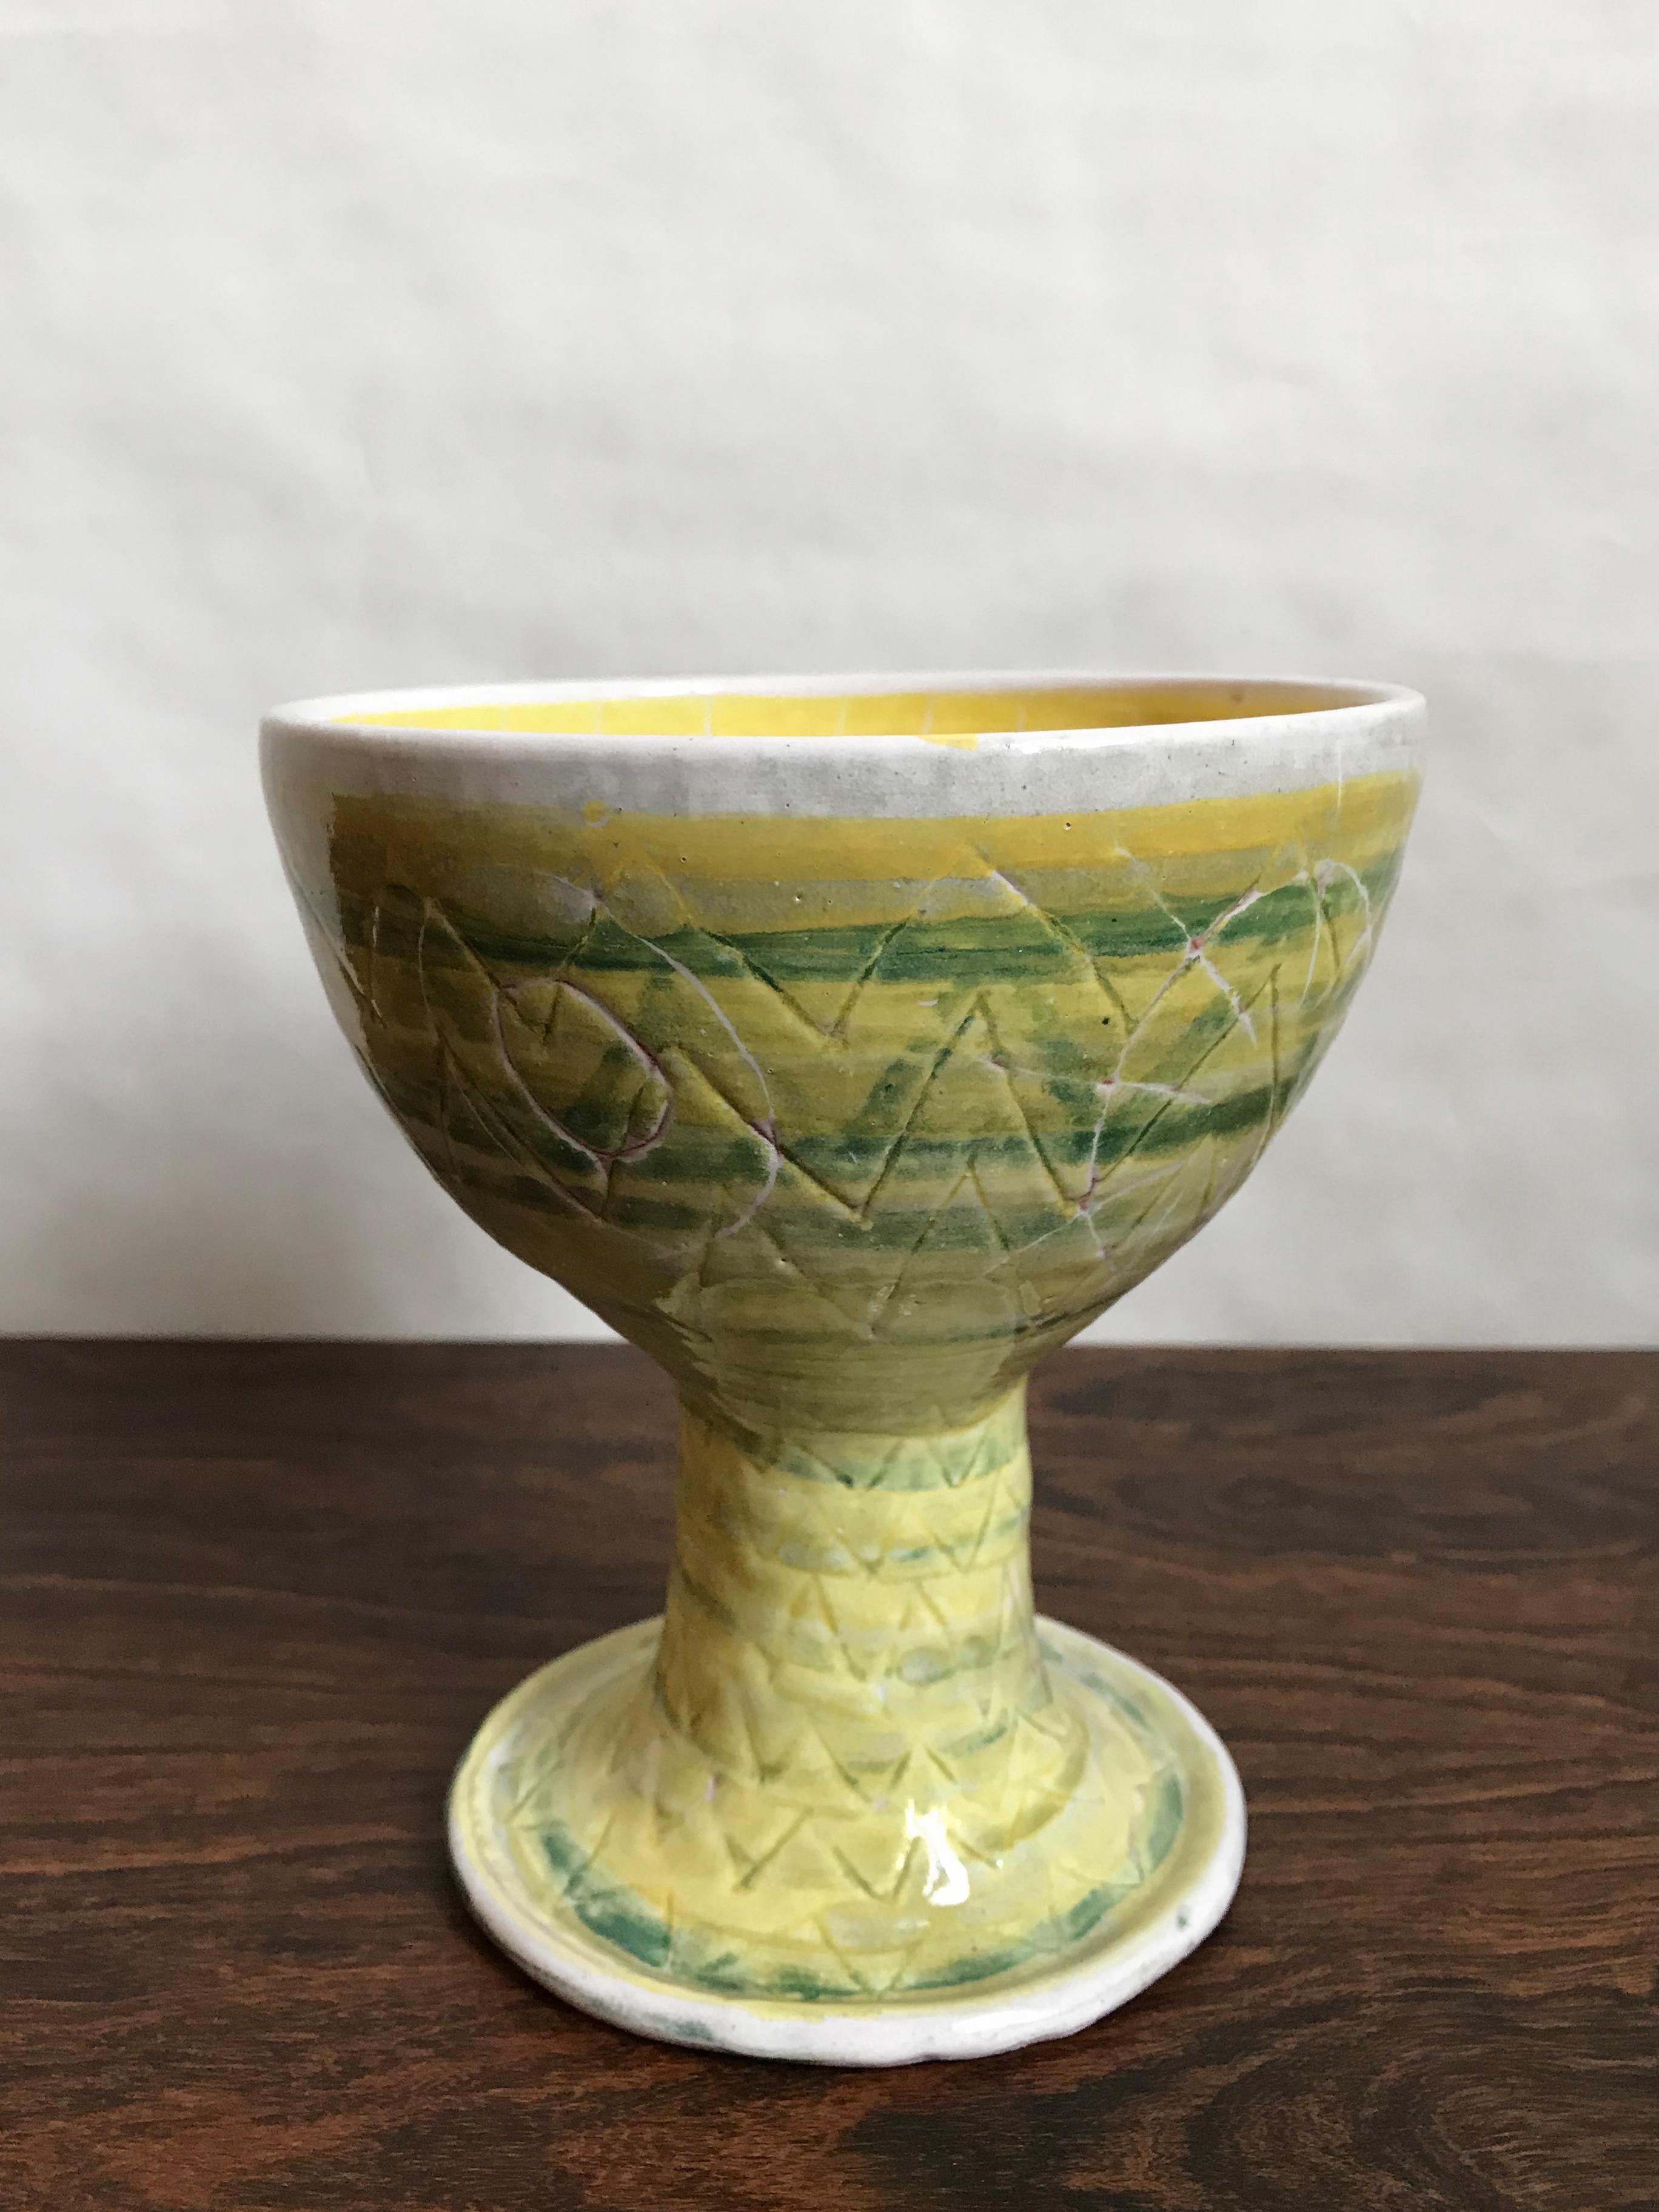 Mid-Century Modern design ceramic glazed vase designed by Italian artist Guido Gambone decorated with an abstract drawing and logo of the artist under the base, 1950s.

Please note that the item is original of the period and this shows normal